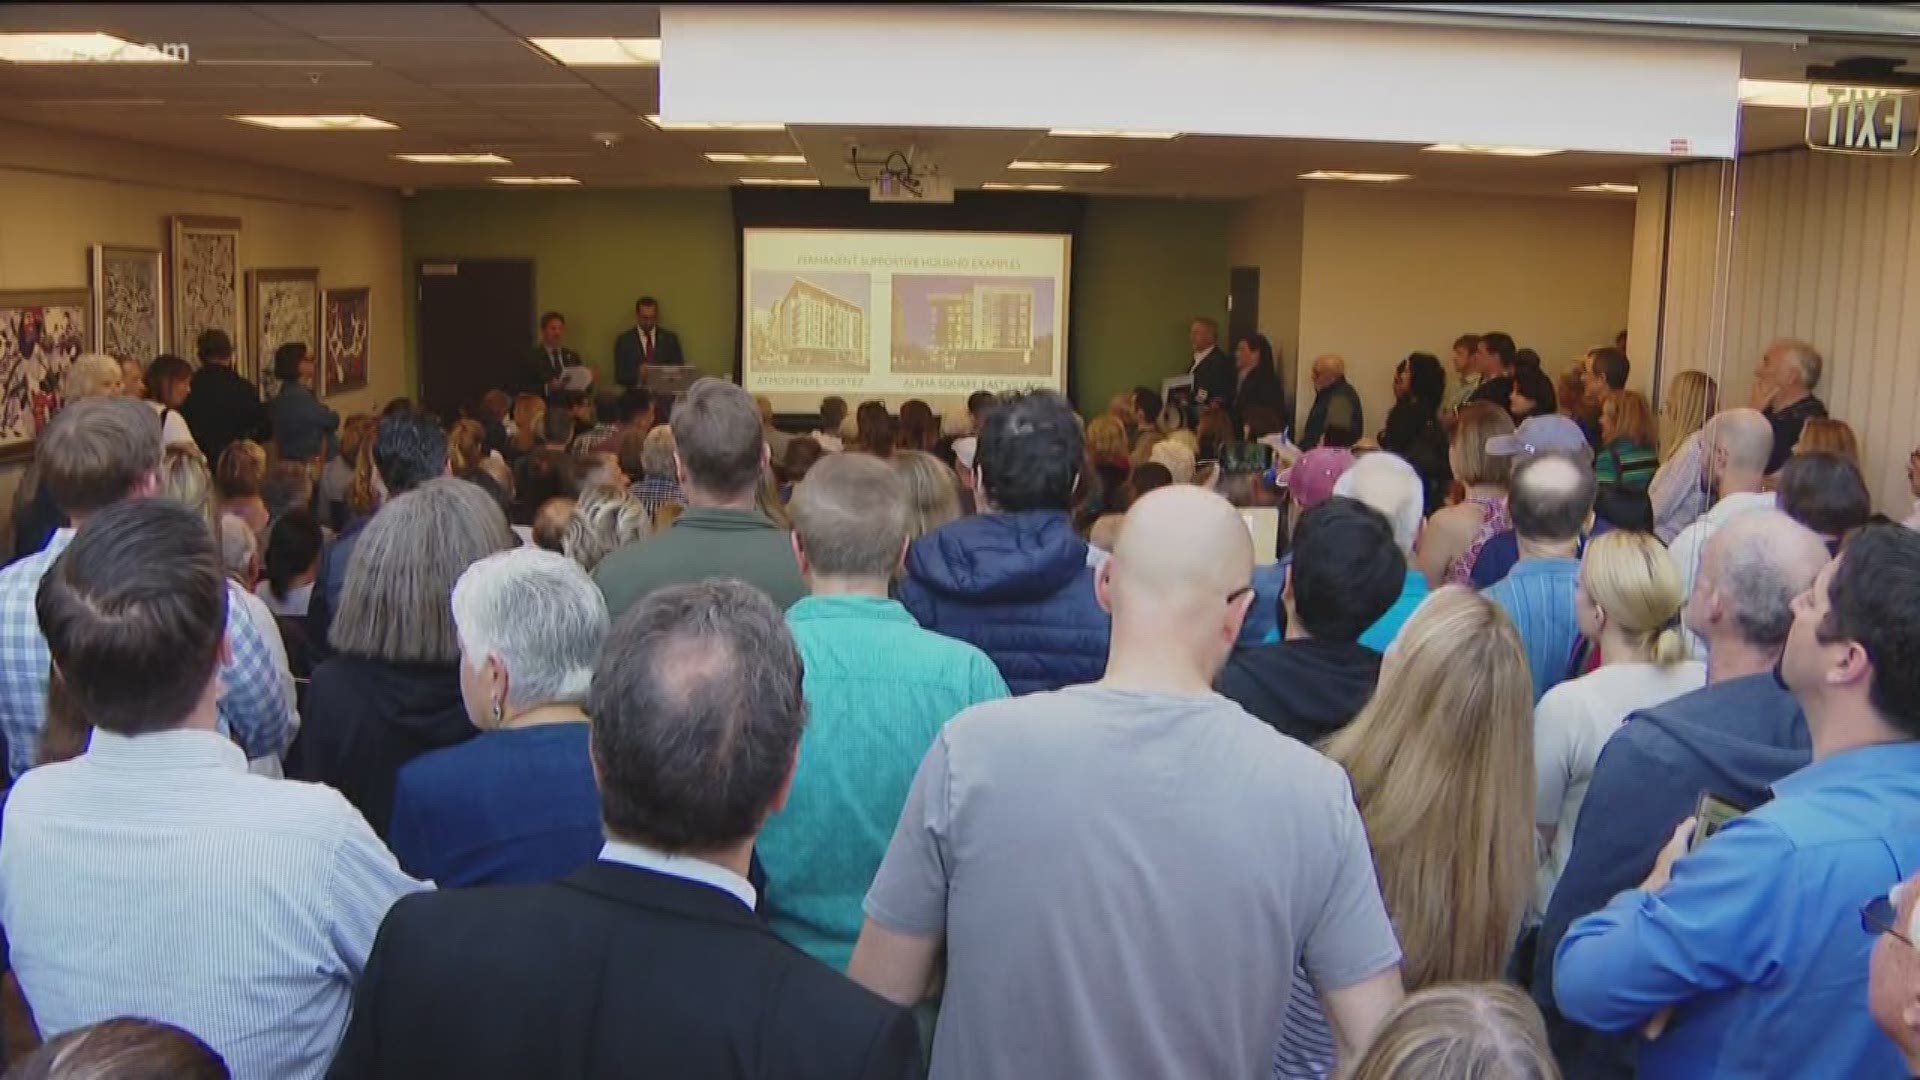 Dozens of Mission Hills community members on Tuesday gathered at the new Mission Hills library to discuss Mayor Faulconer’s proposal to create eight permanent supportive housing complexes that would provide 200 units in total for homeless in transition.